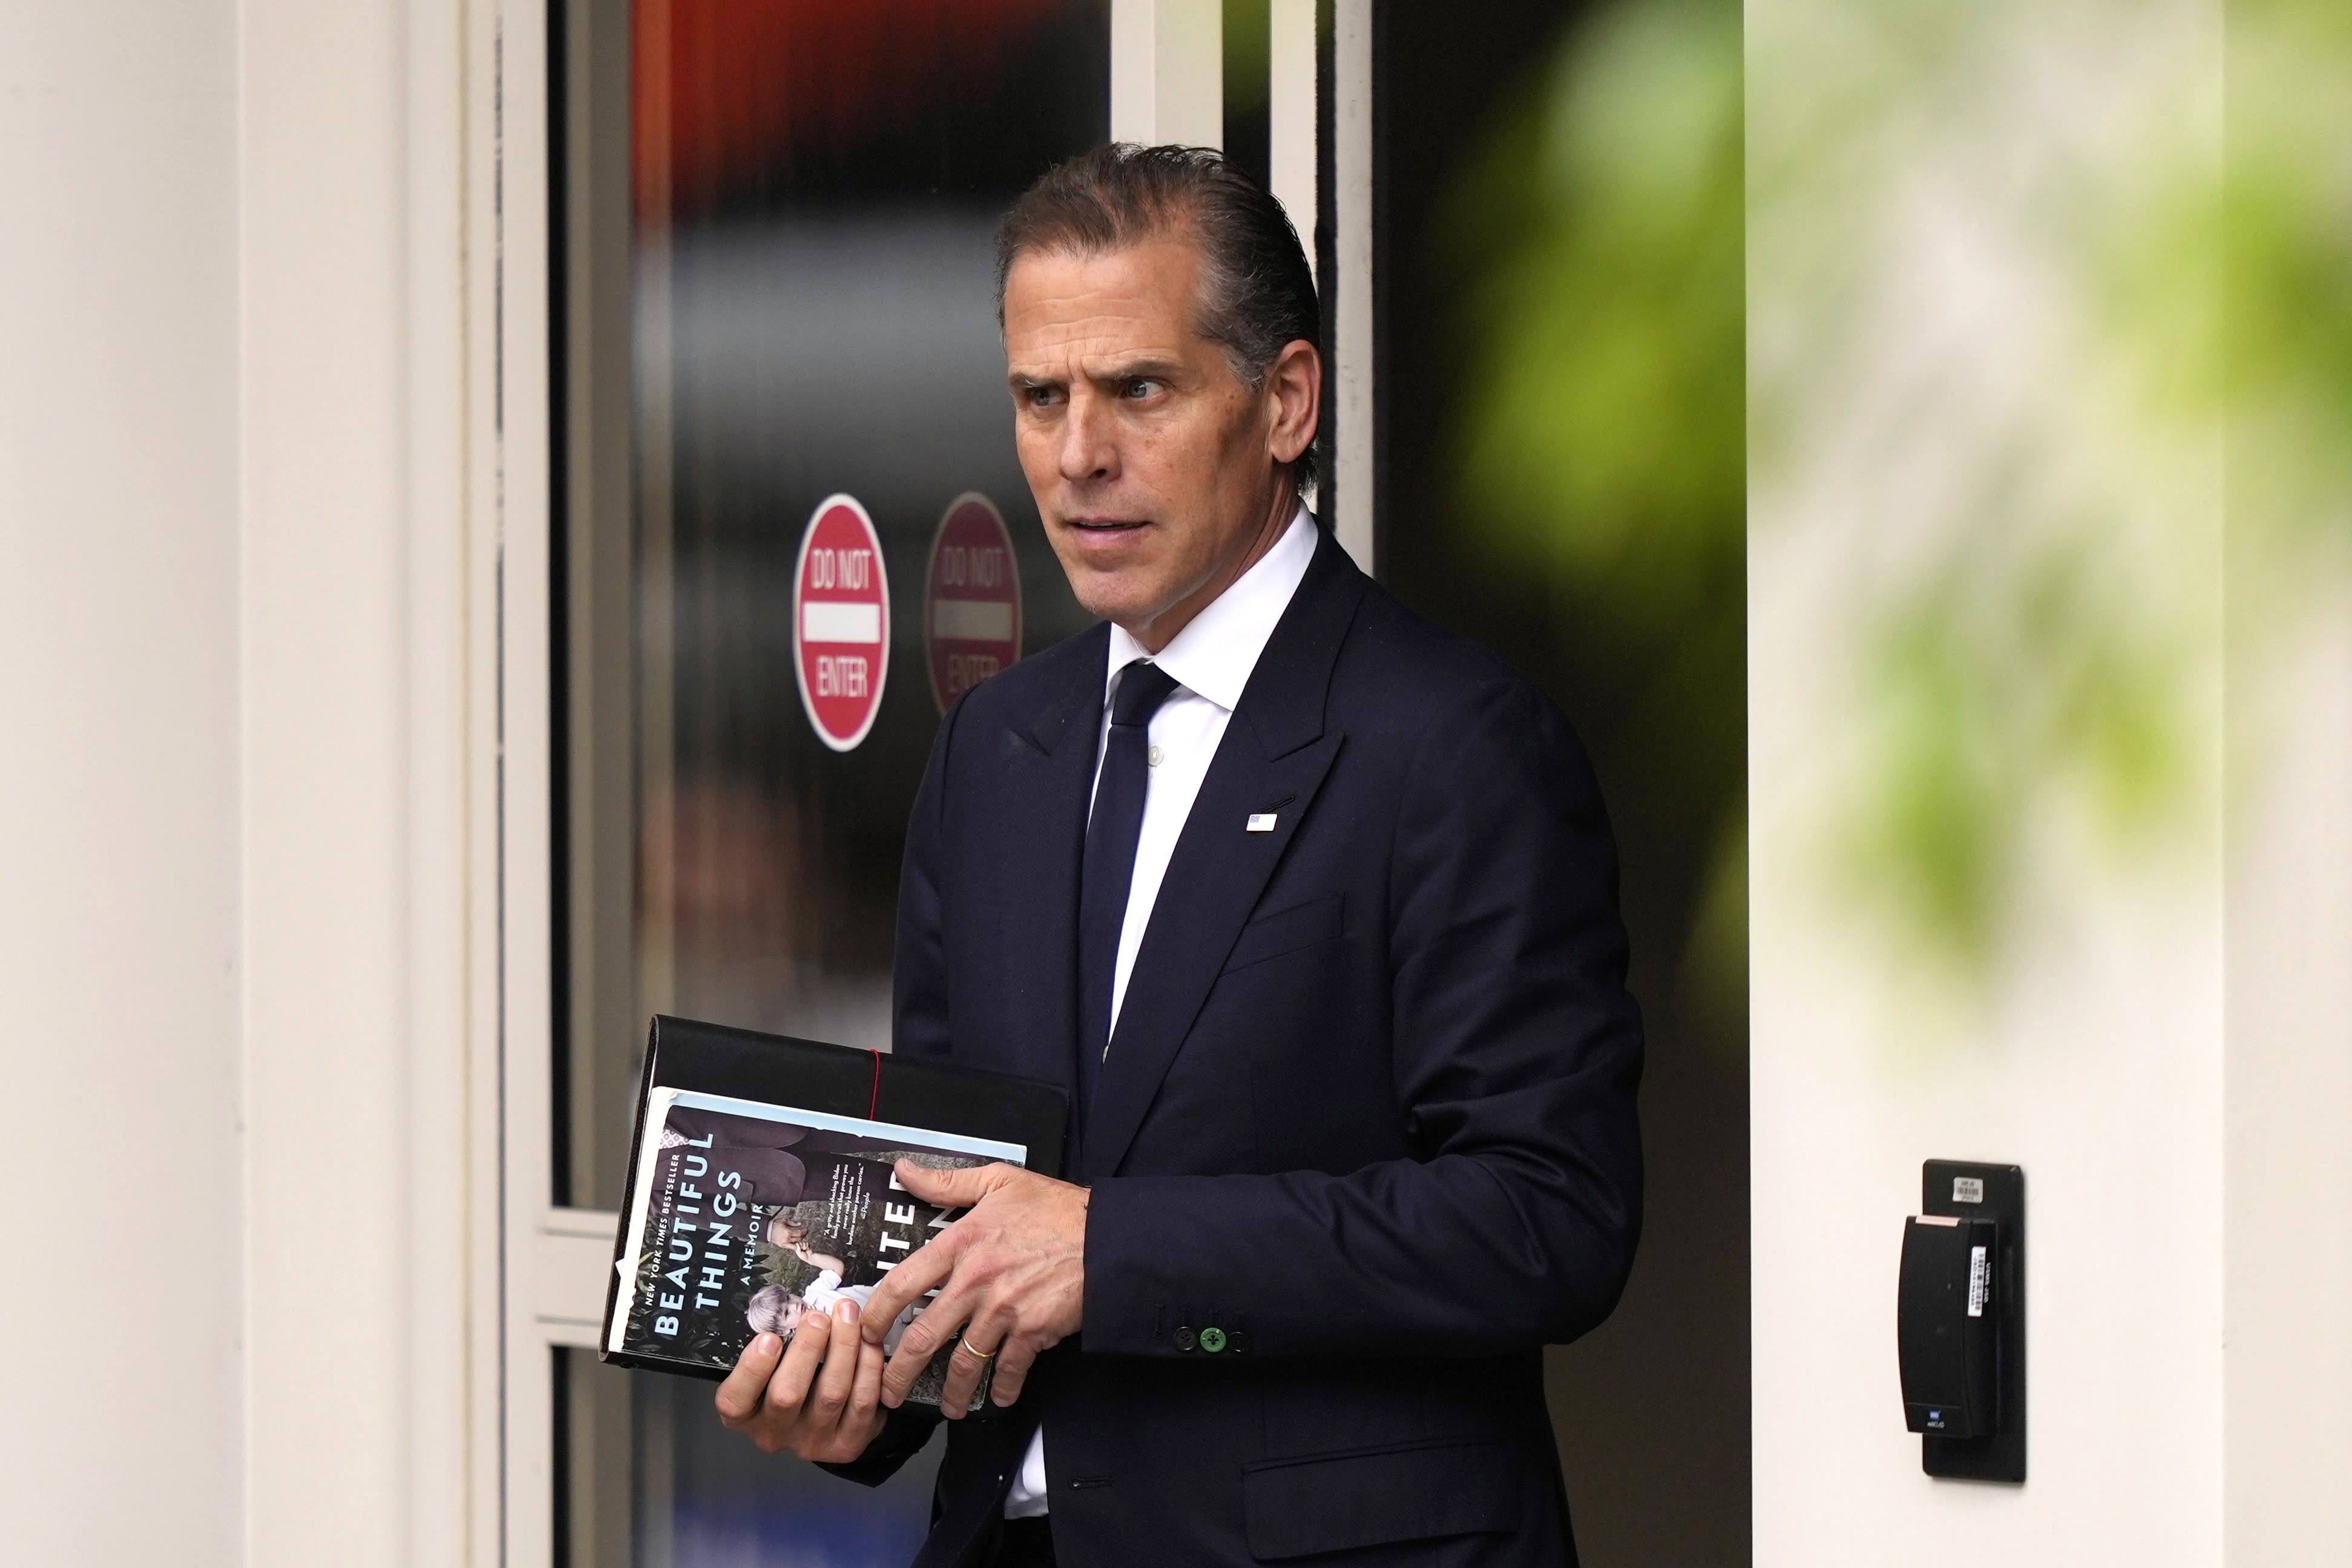 The prosecution is wrapping up in Hunter Biden's gun trial. There are 2 more witnesses expected